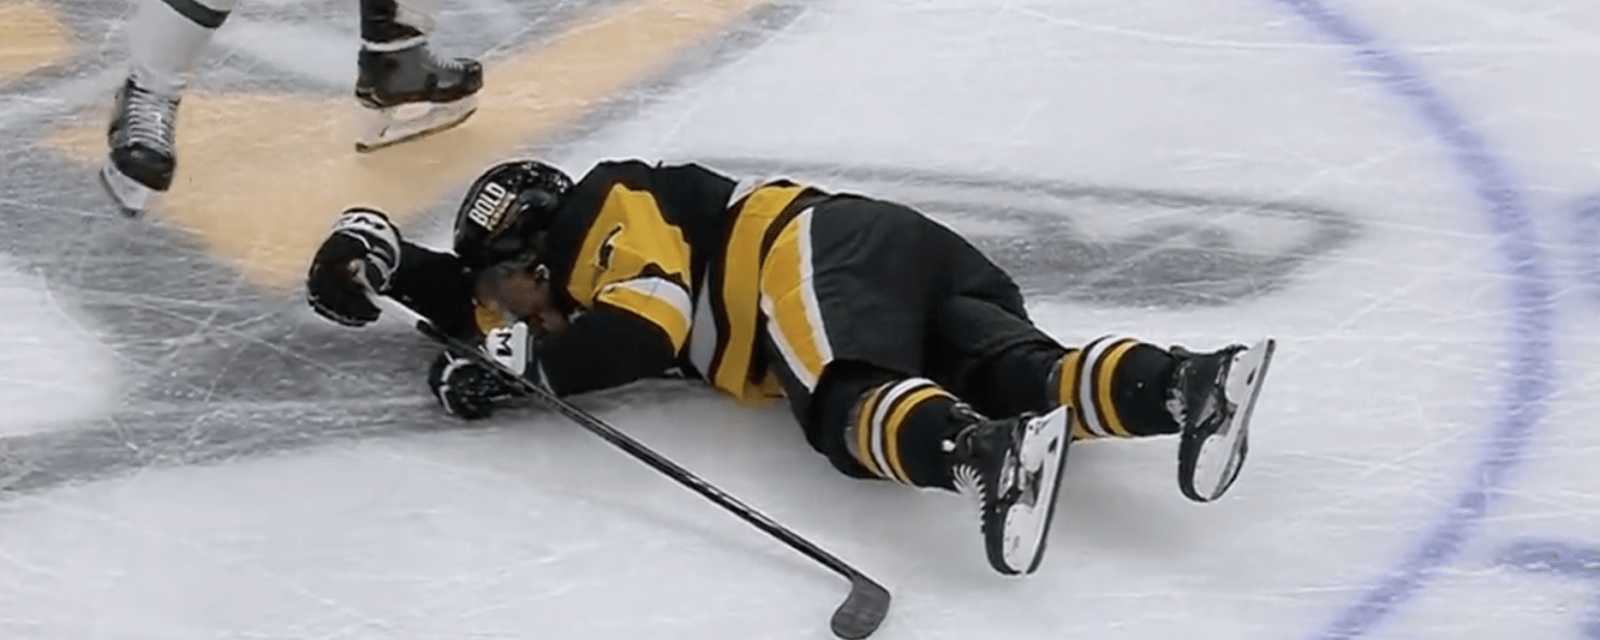 Penguins’ rookie knocks himself out while throwing huge hit in NHL debut